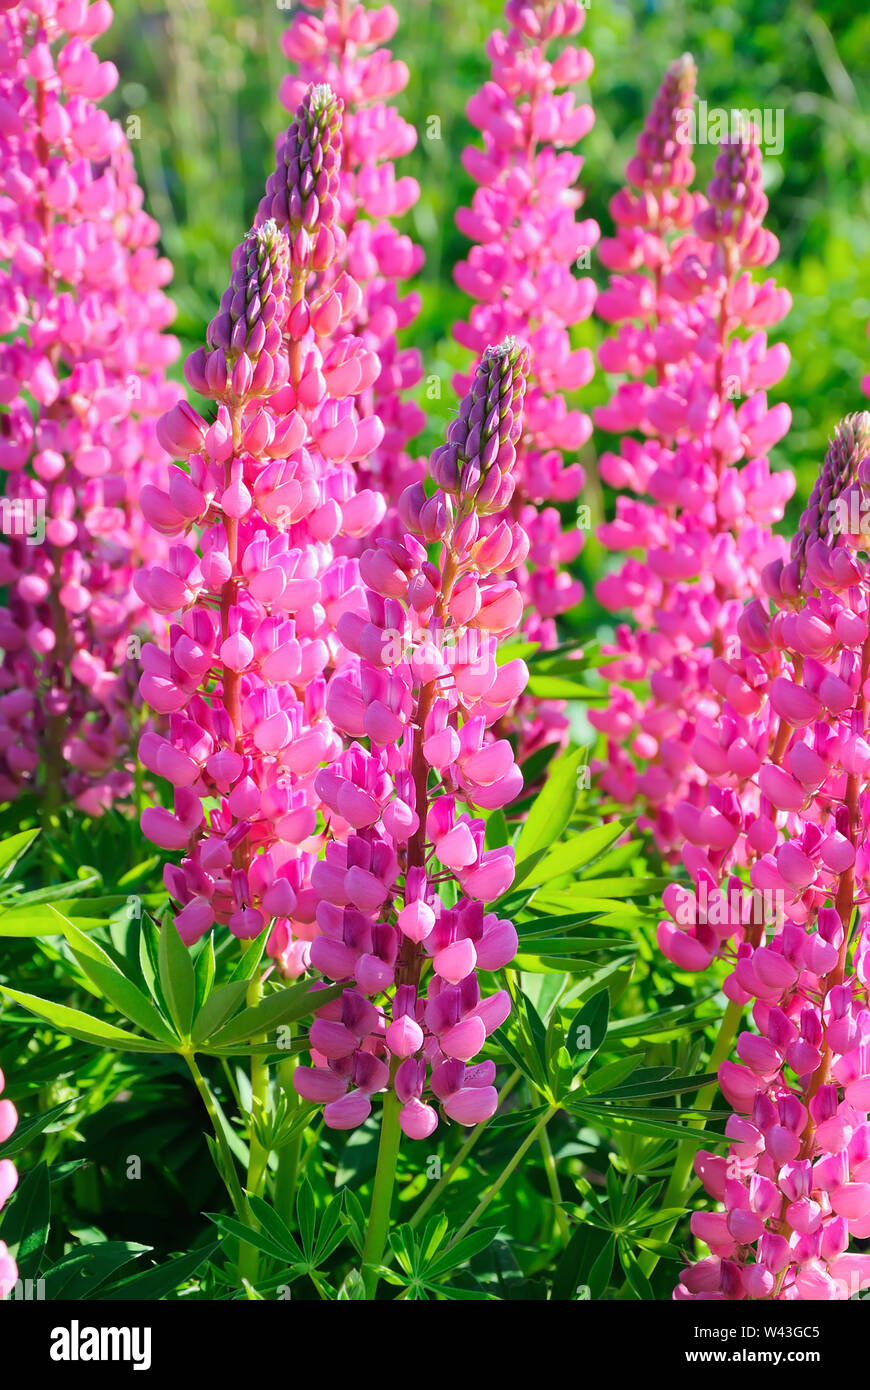 Pink lupinus flowers in the garden Stock Photo